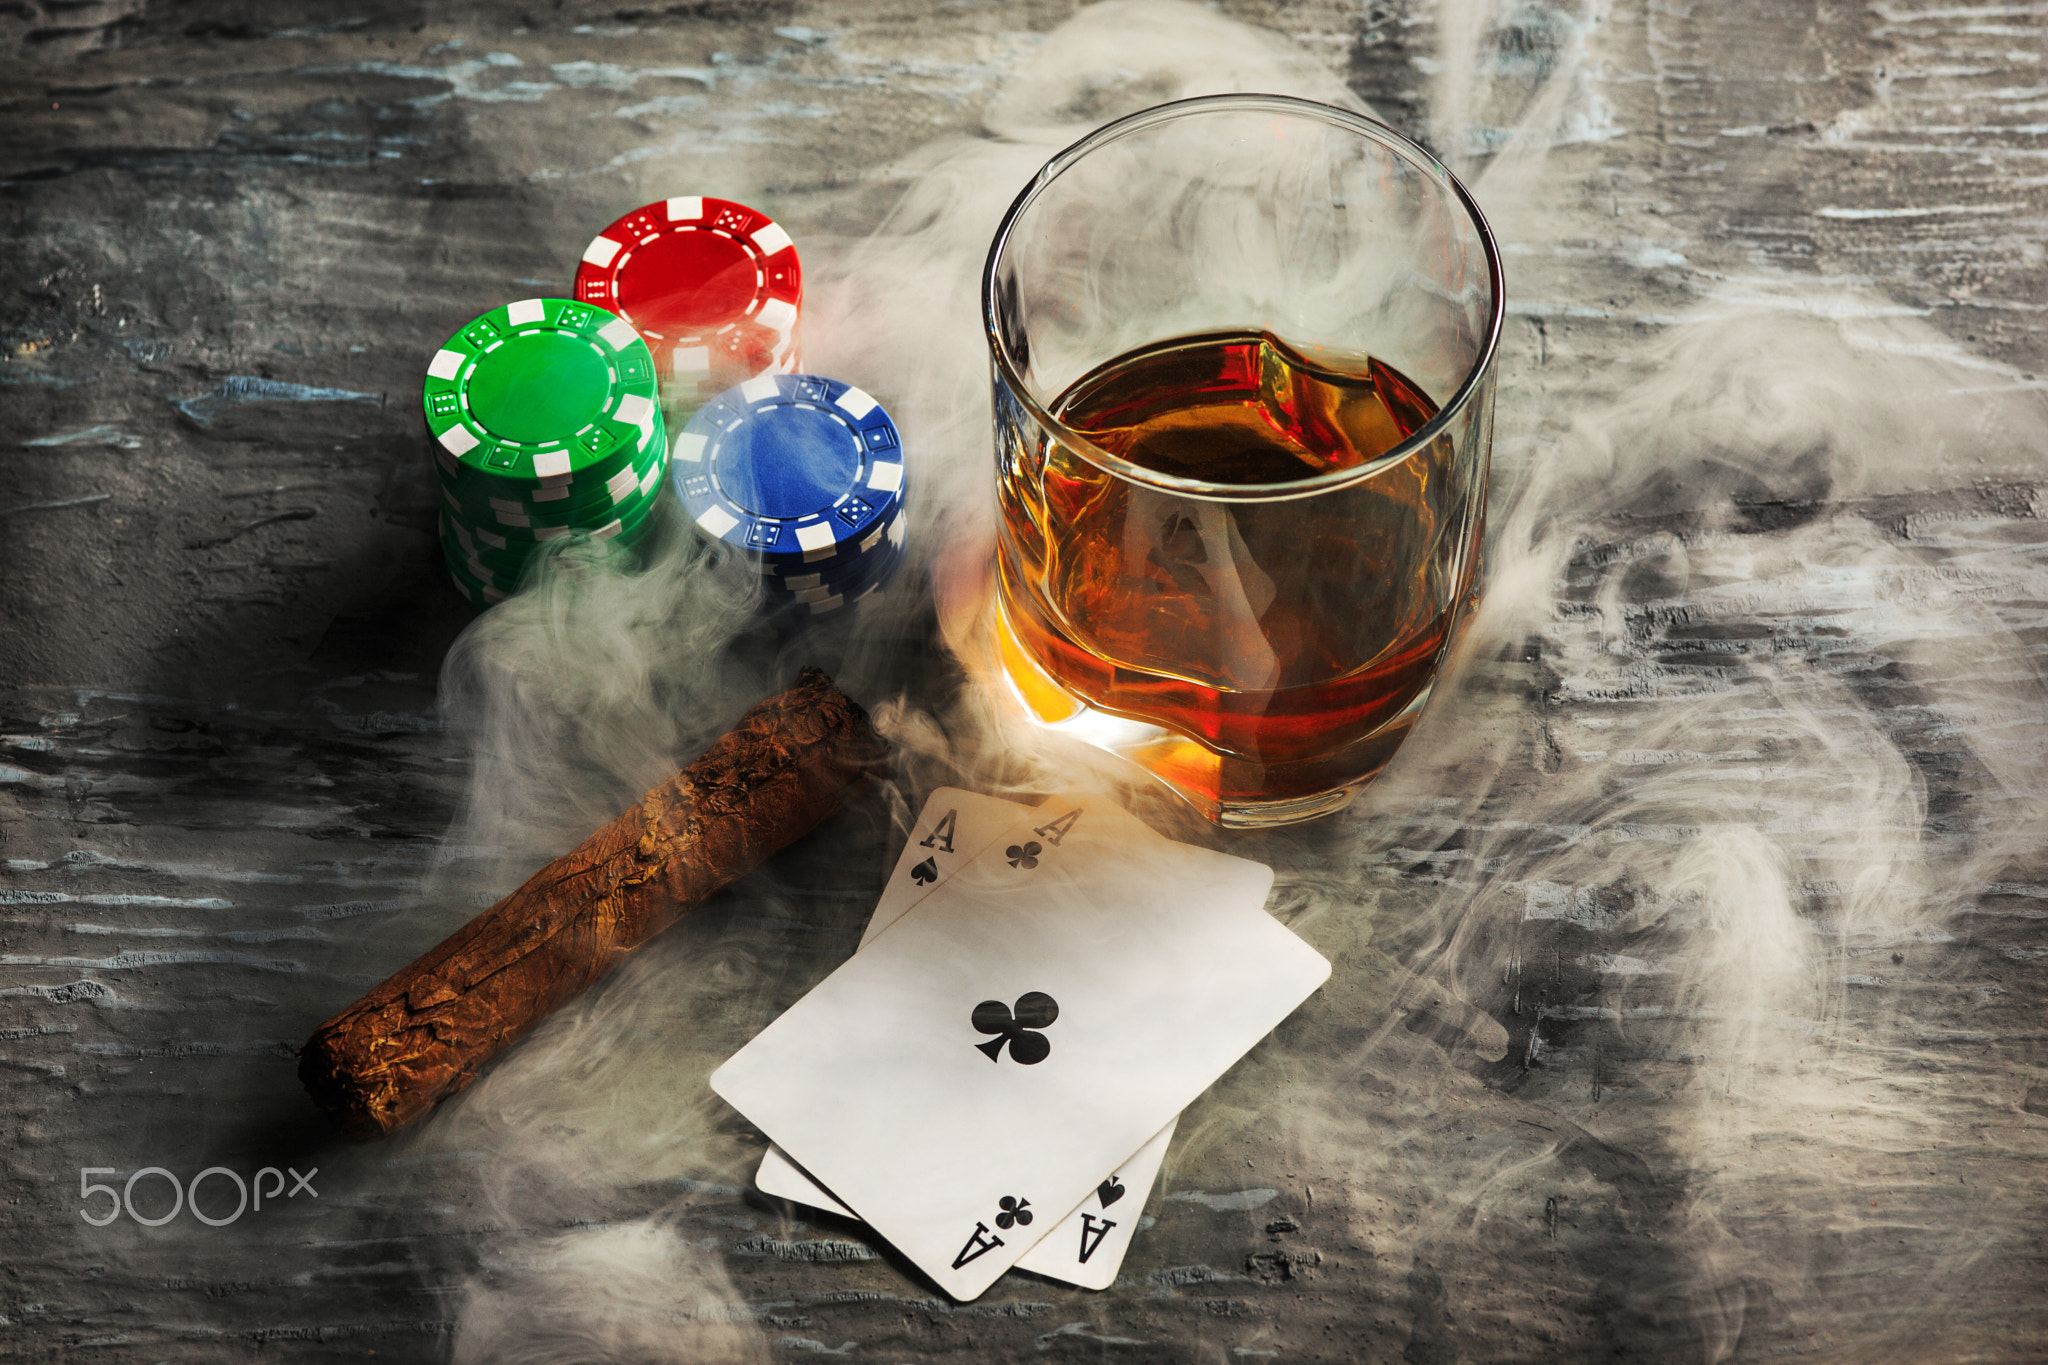 Cigar, chips for gamblings, drink and playing cards